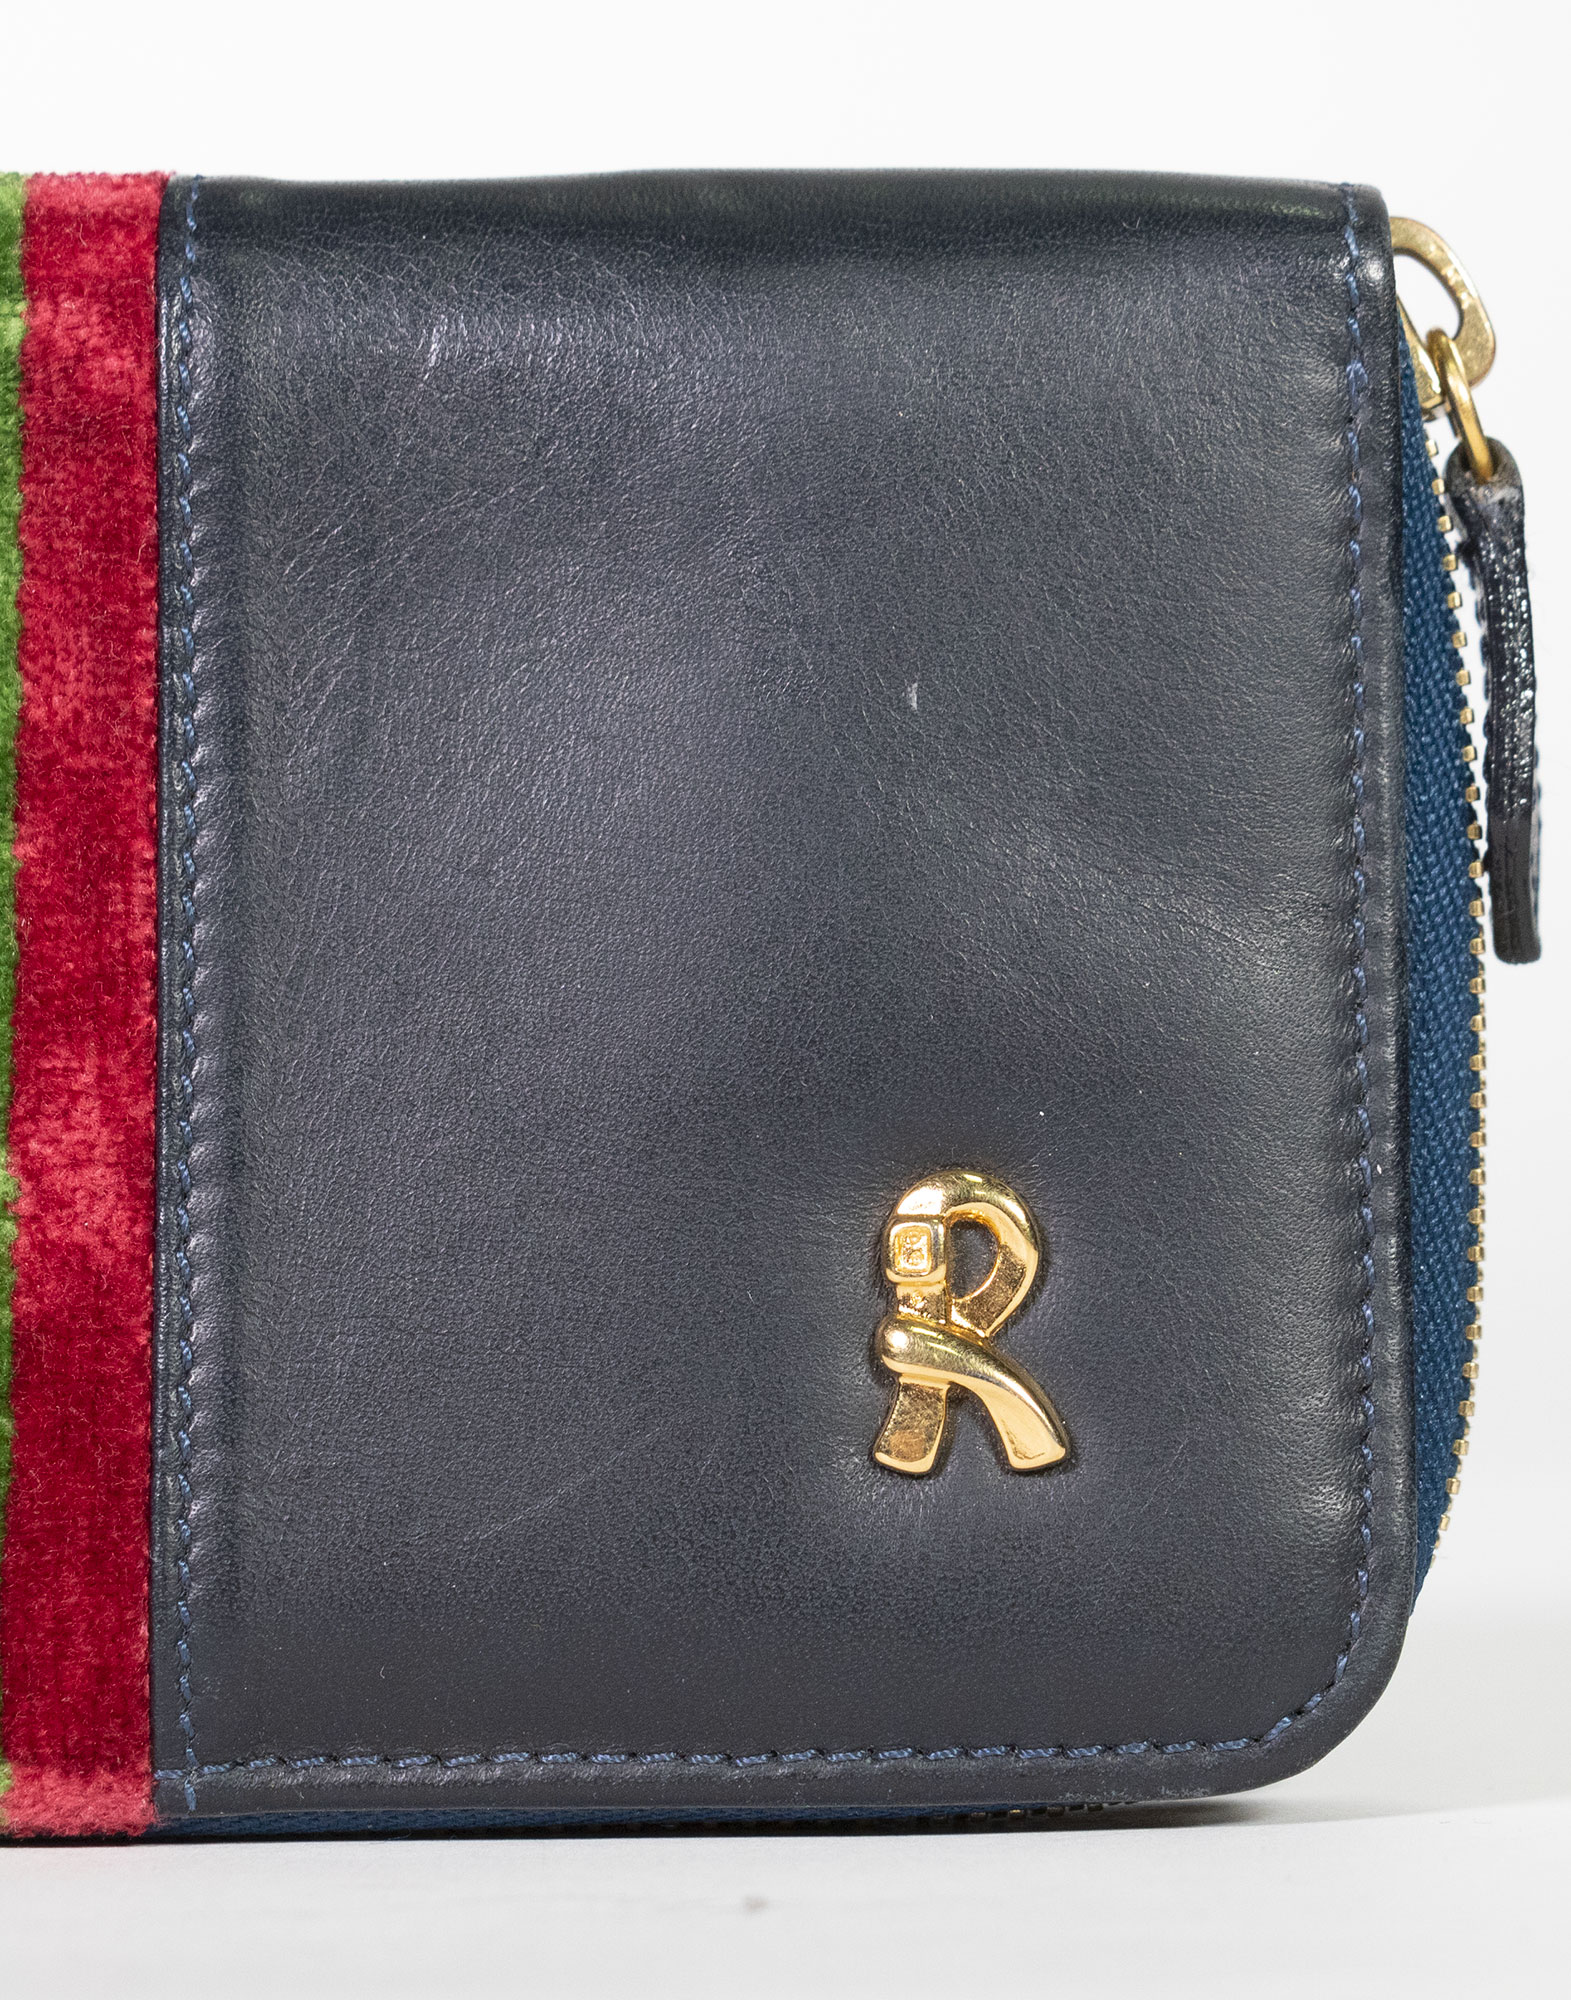 Roberta di Camerino - Leather wallet with central band